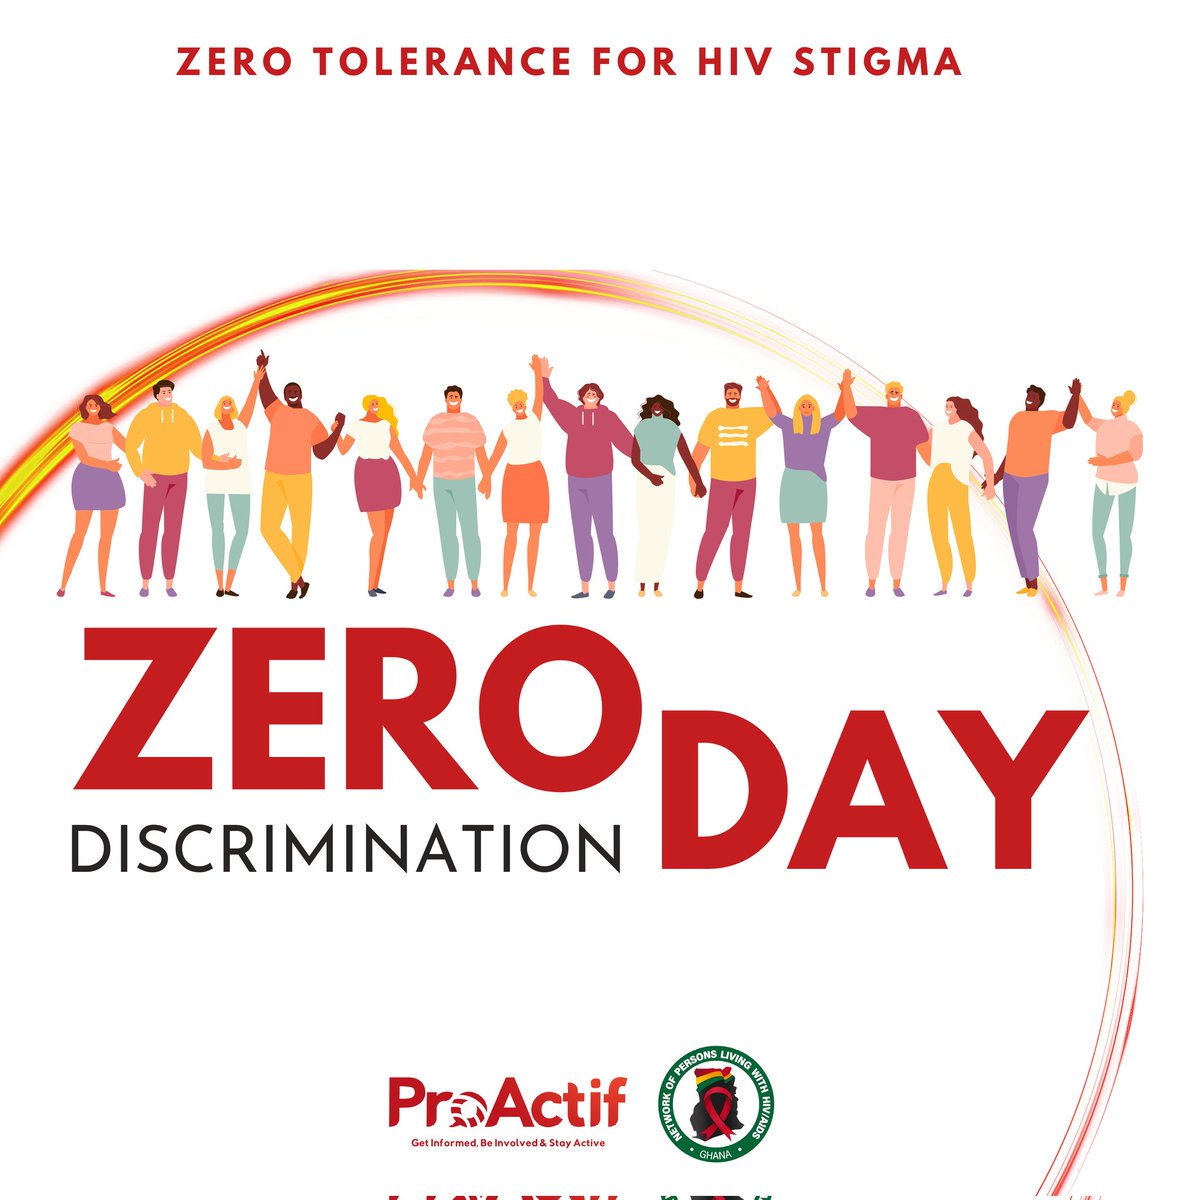 On #ZeroDiscriminationDay, we #standinsolidarity w/ persons living w/ HIV & reaffirm our commitment 2 promoting acceptance & understanding. 

Let's eradicate  #stigma associated w/ HIV & create a future where everyone is treated w/ dignity & respect, regardless of their status.